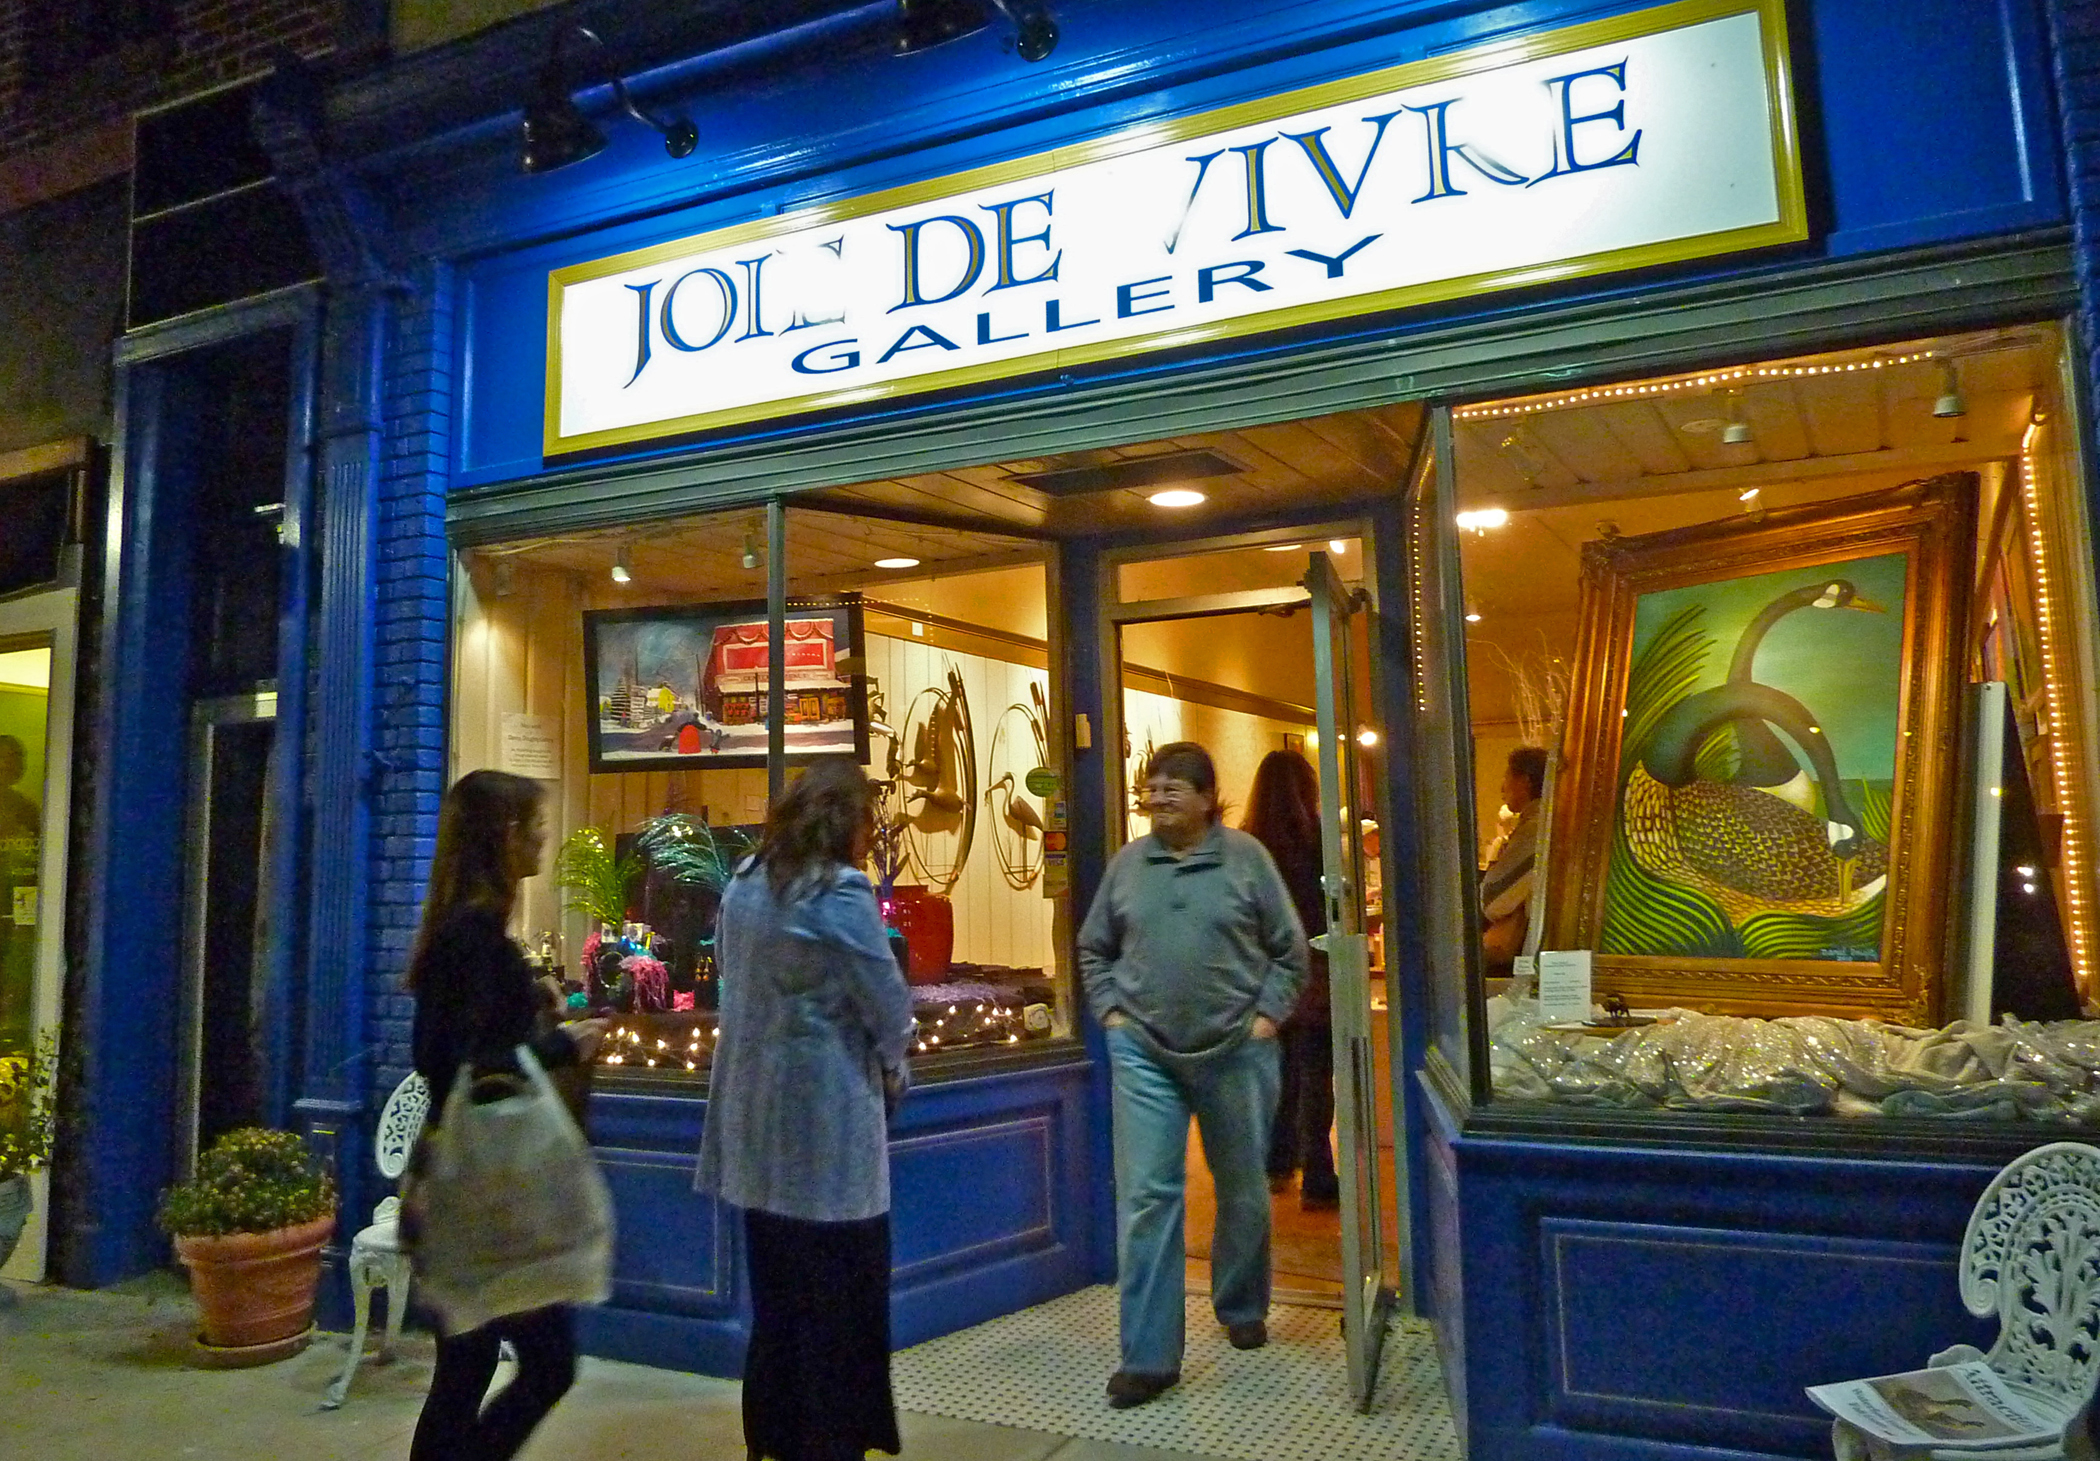 Joie Exterior: The Joie de Vivre Gallery helped spark the revitalization of downtown Cambridge, on Maryland’s Eastern Shore. (Photo by Jill Jasuta)